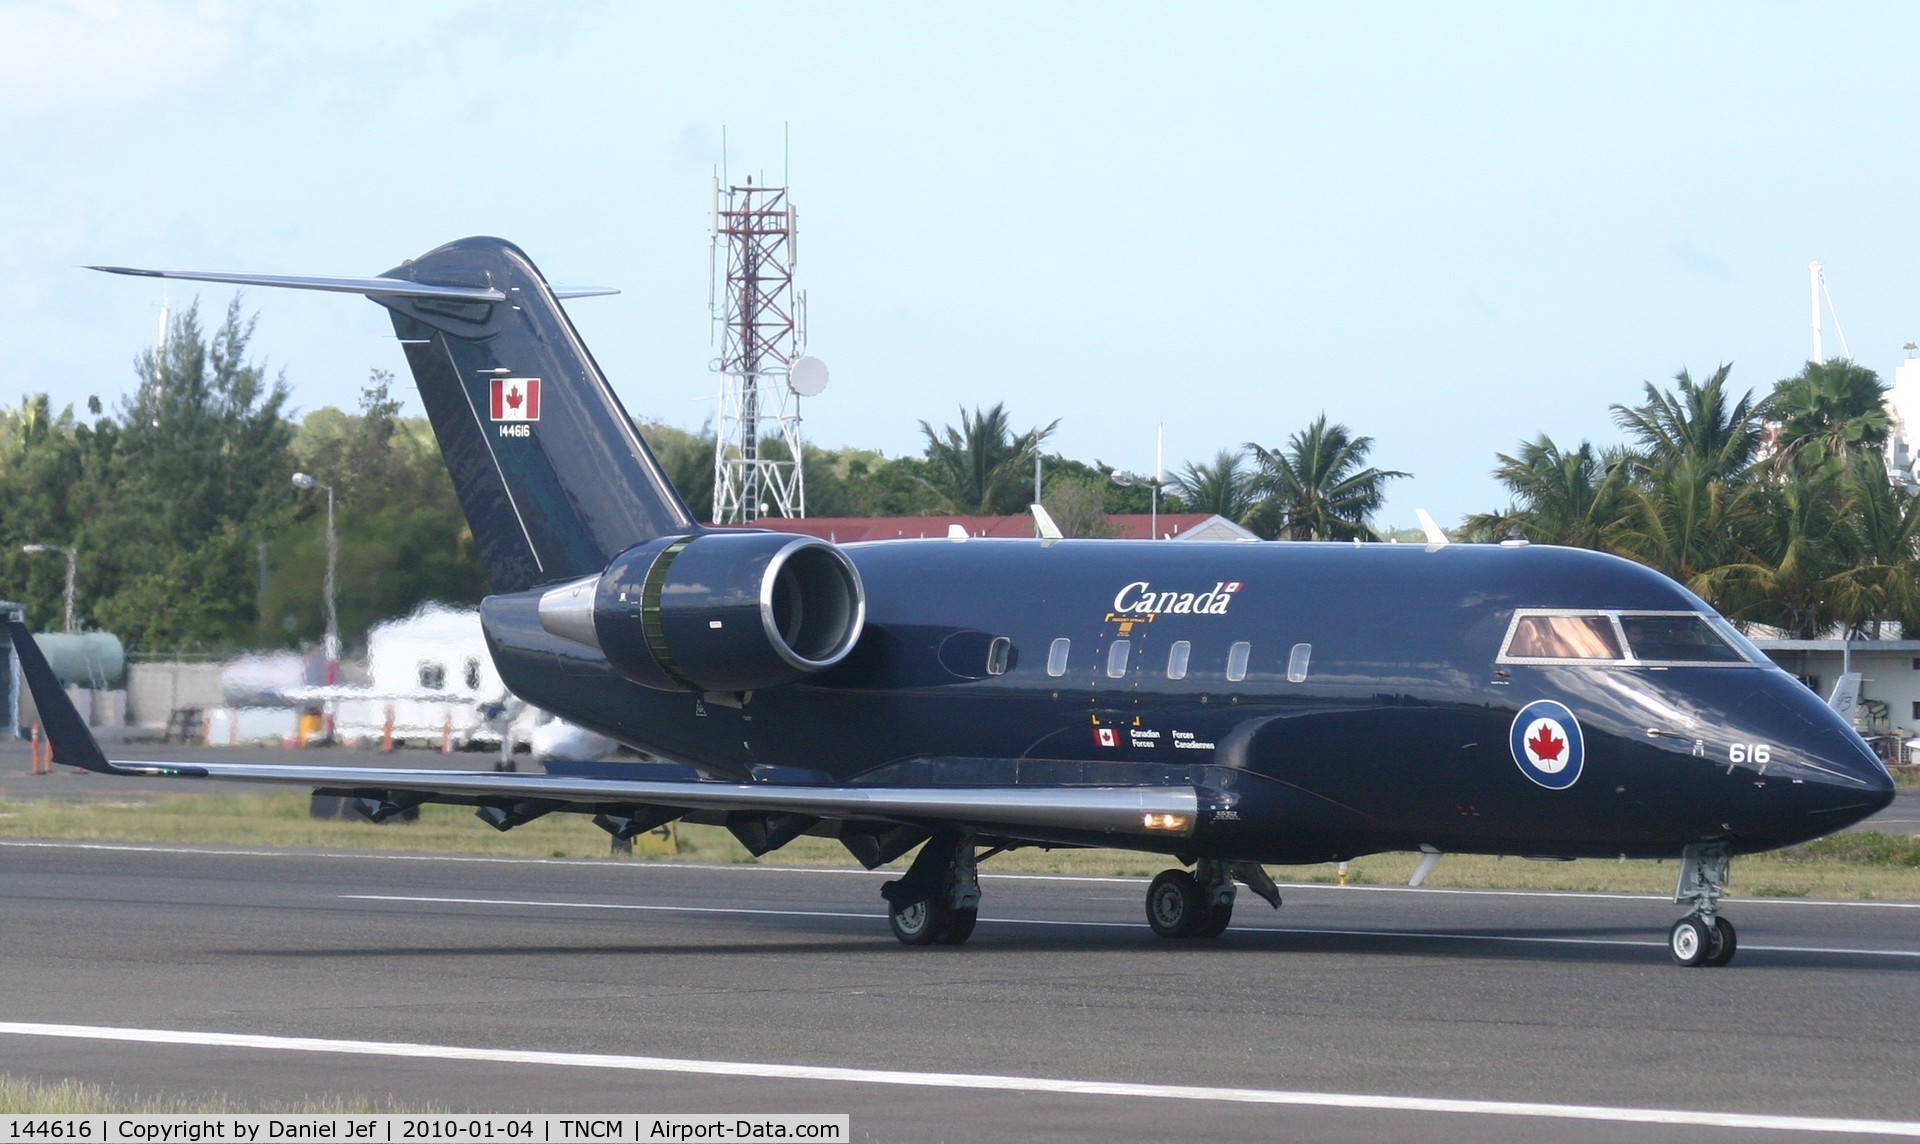 144616, 1985 Canadair CC-144B Challenger (CL-600-2B16) C/N 3038, Can force Just landed at TNCM on runway 10 and making use of there stopping power